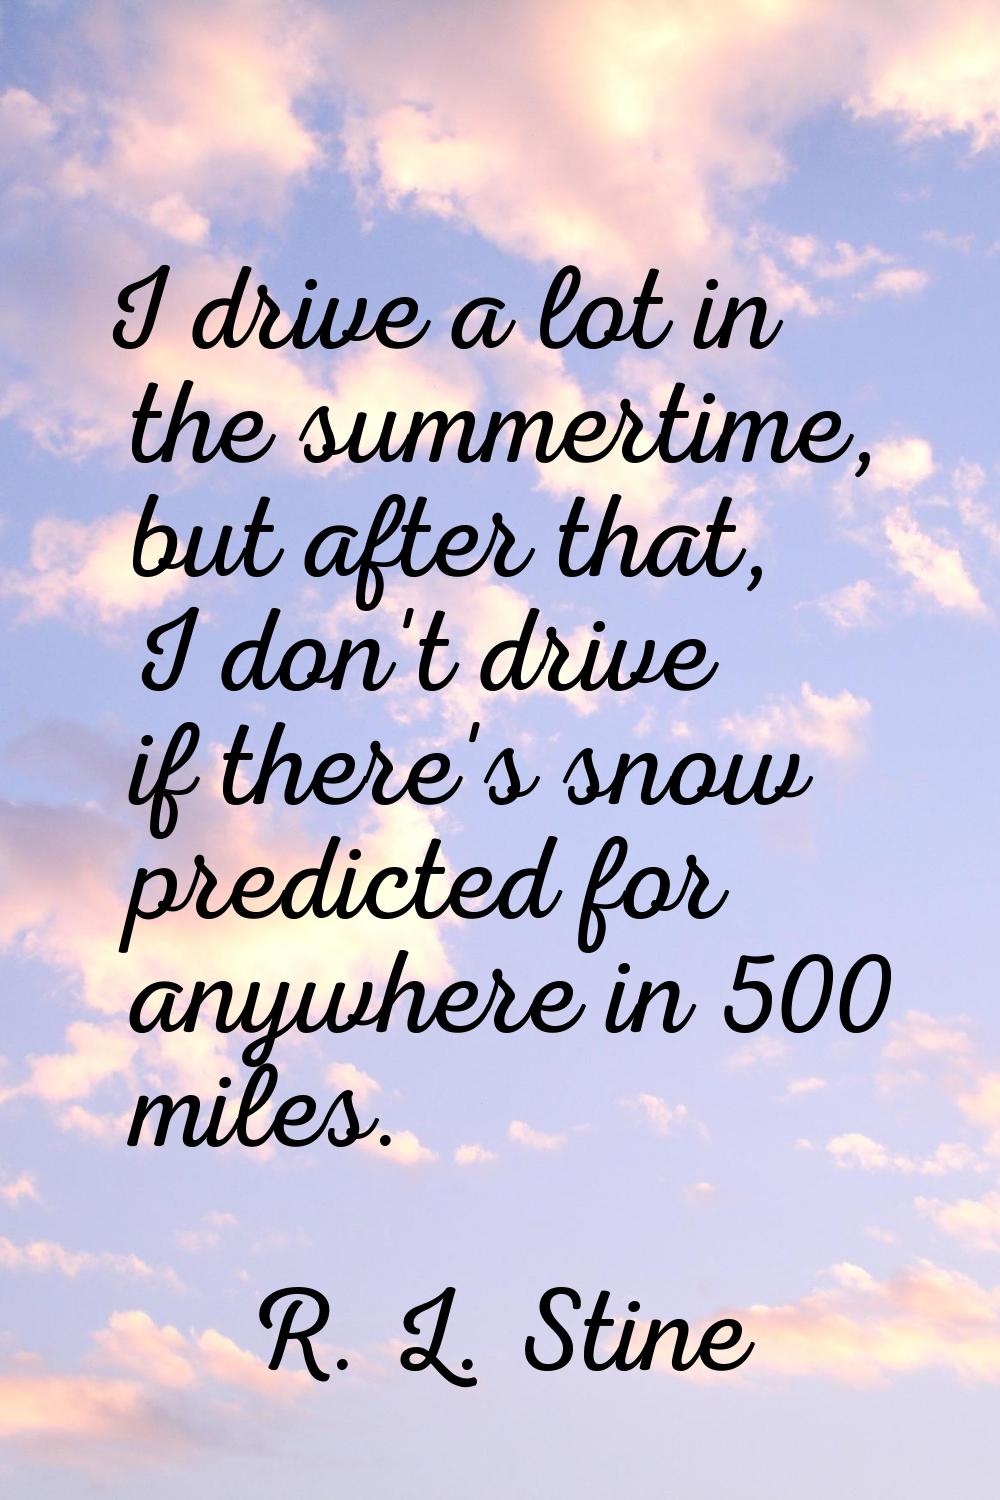 I drive a lot in the summertime, but after that, I don't drive if there's snow predicted for anywhe